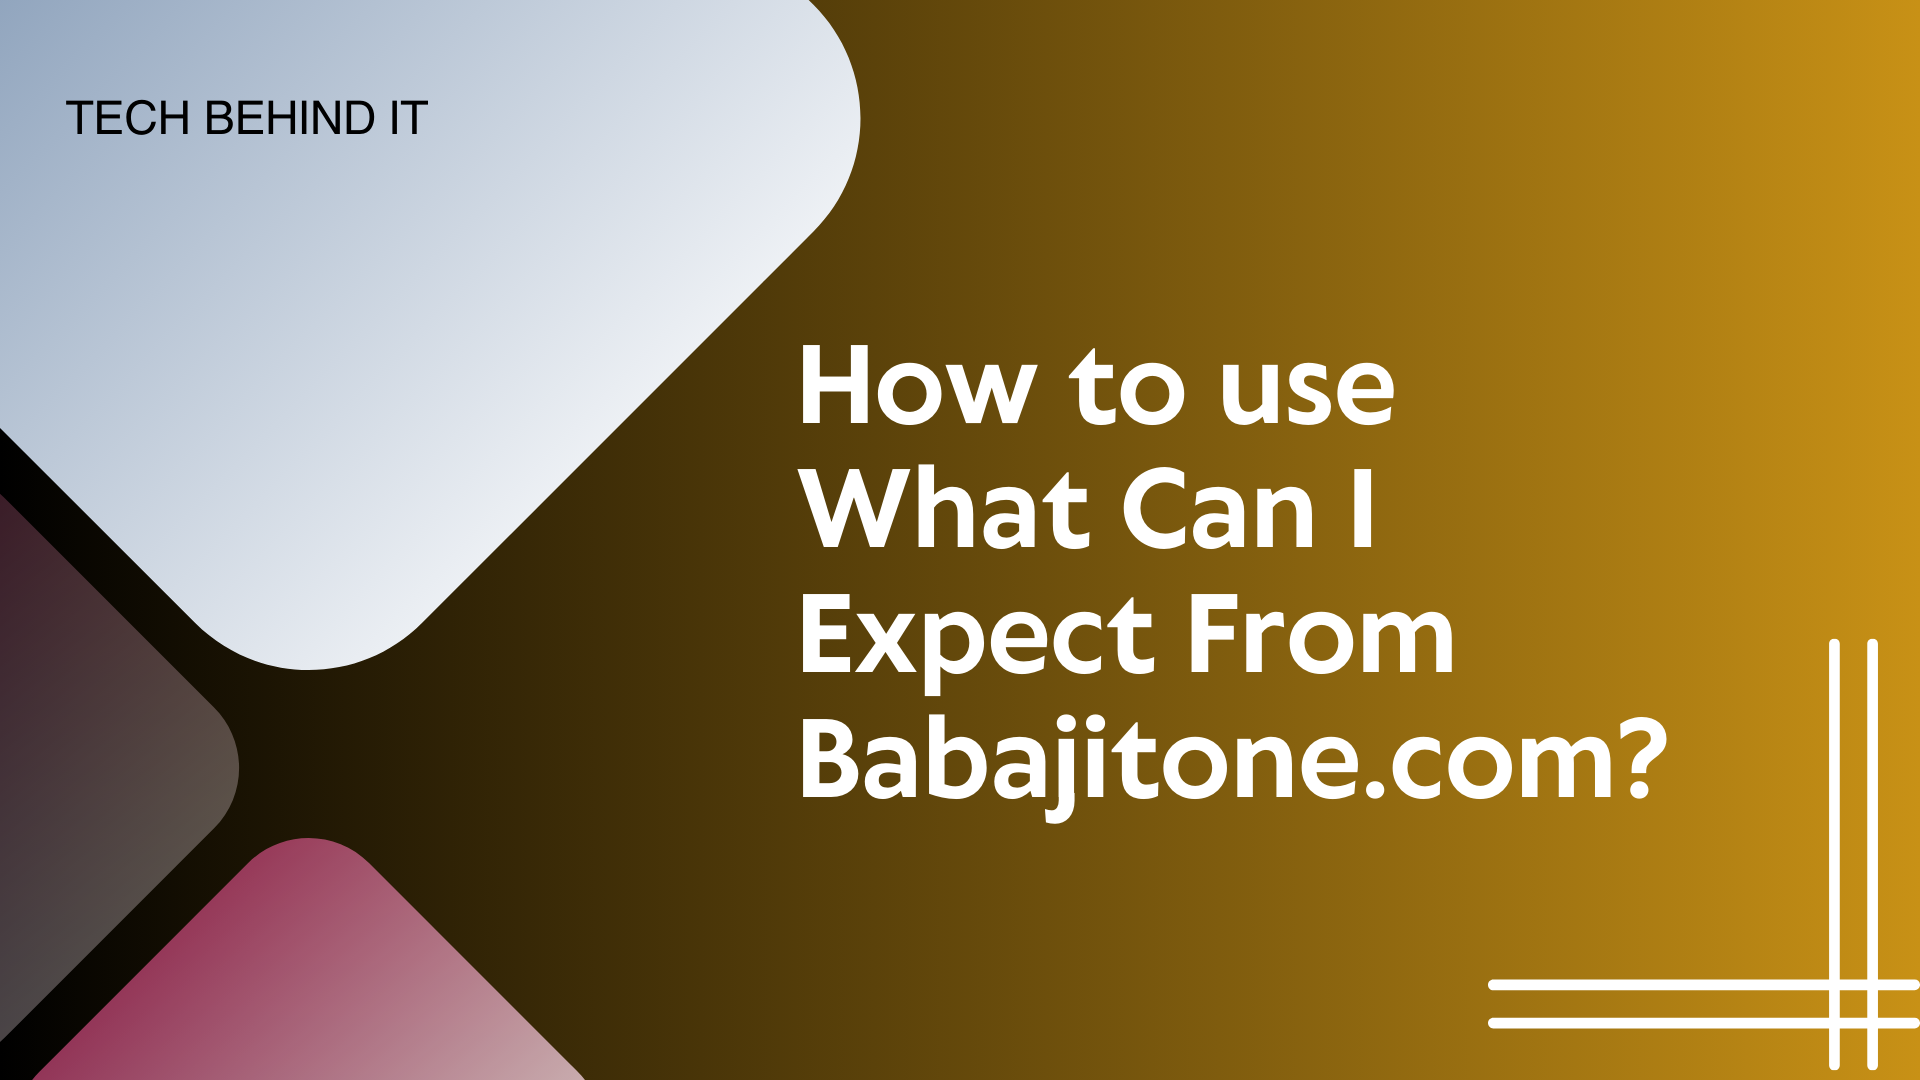 What Can I Expect From Babajitone.com?